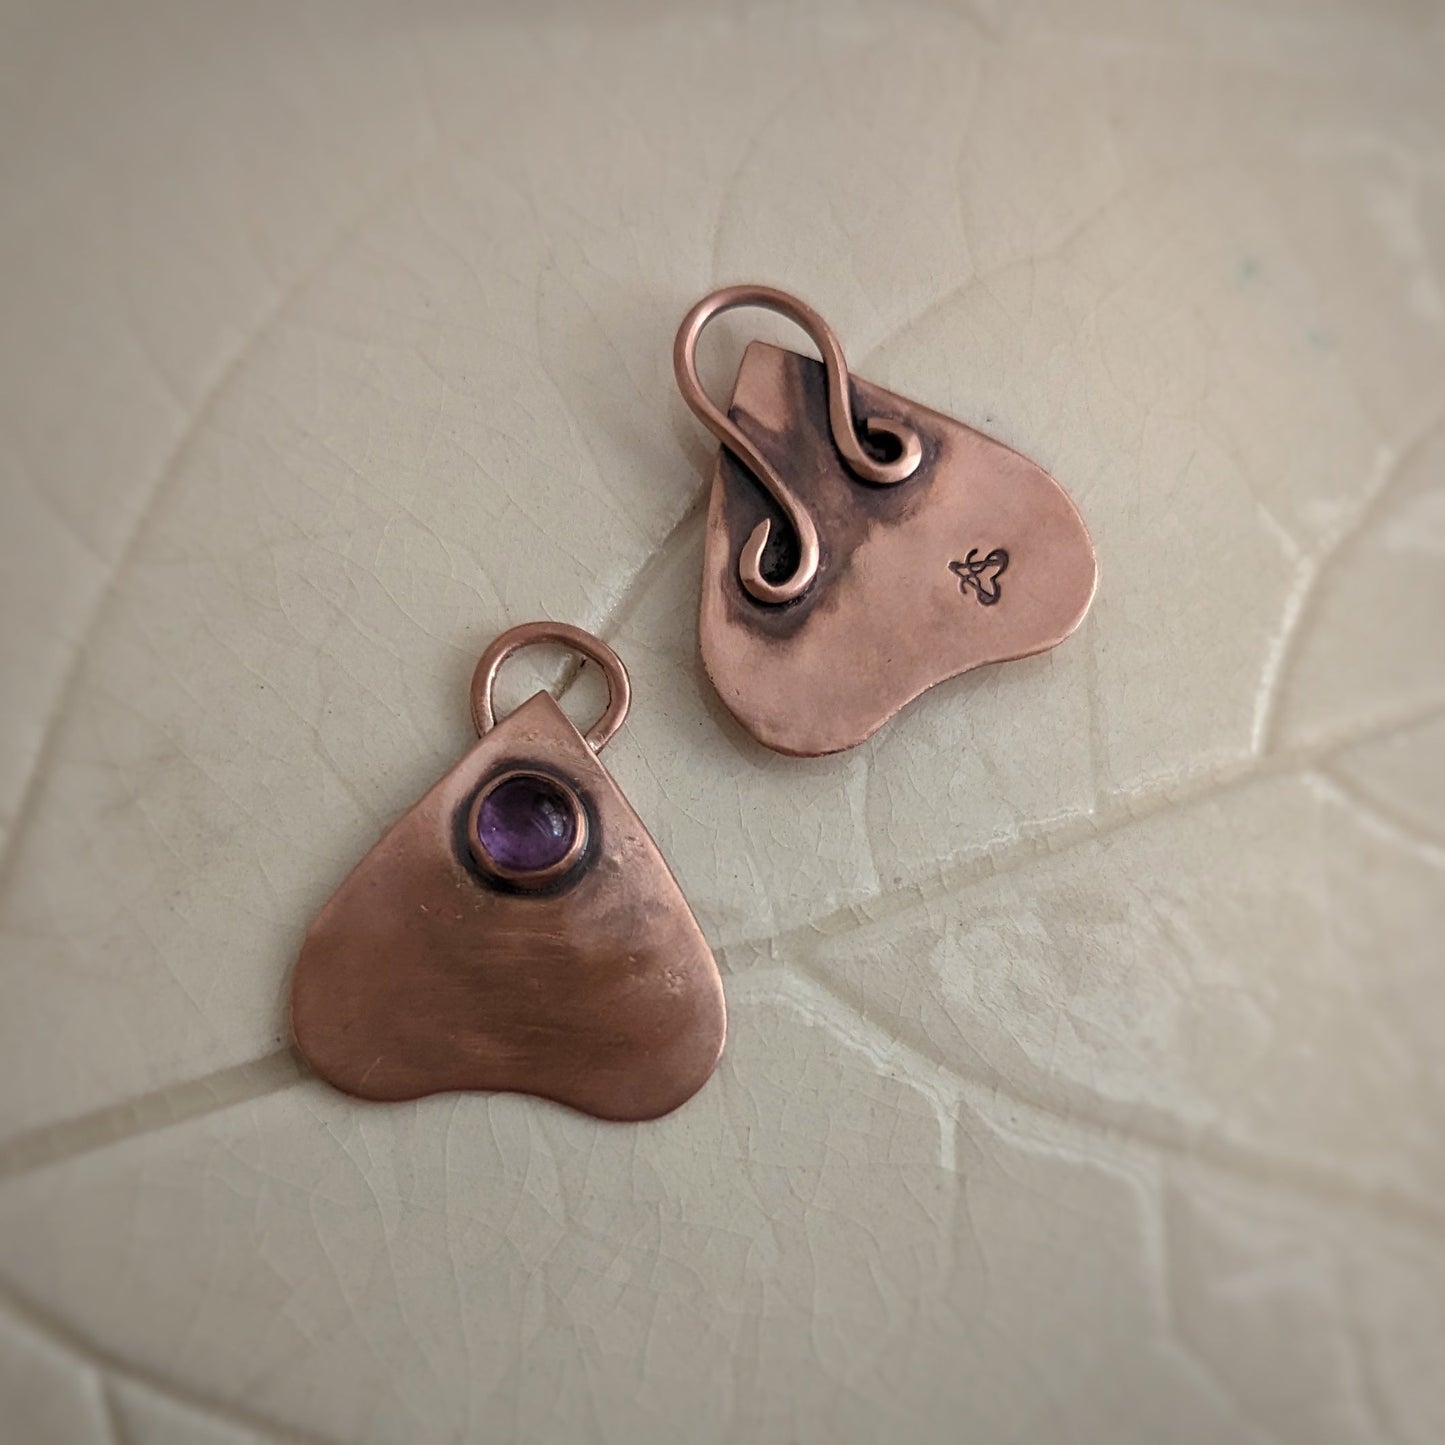 Two planchette pendants, one with amethyst set in the front, and the other turned to show the decorative bail and the Aras Sivad Studio stamp on the back.